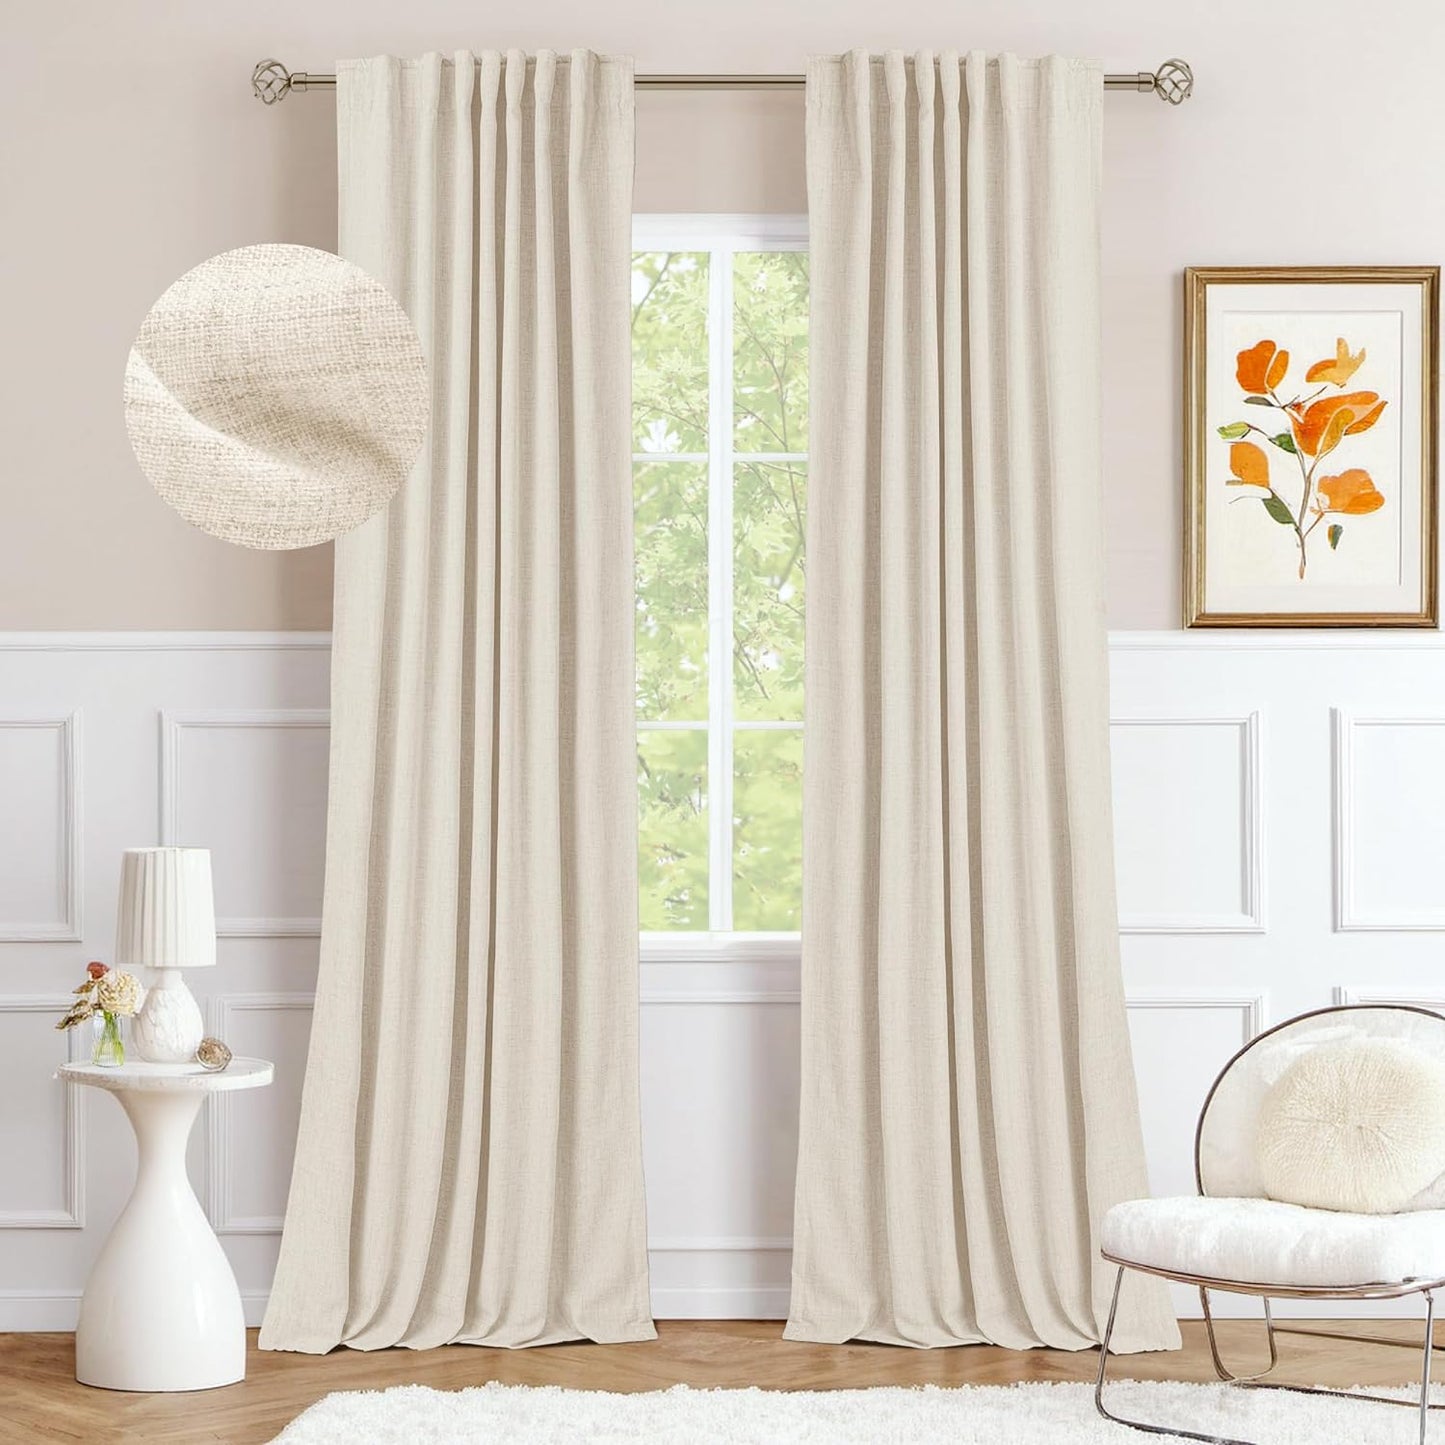 INOVADAY 100% Blackout Curtains for Bedroom 84 Inch Length 2 Panels Set, Linen Blackout Curtains 84 Inches Long, Back Tab/Rod Pocket Black Out Curtains for Living Room Windows - Beige, W50 X L84  INOVADAY 01 Cream 50''W X 96''L 